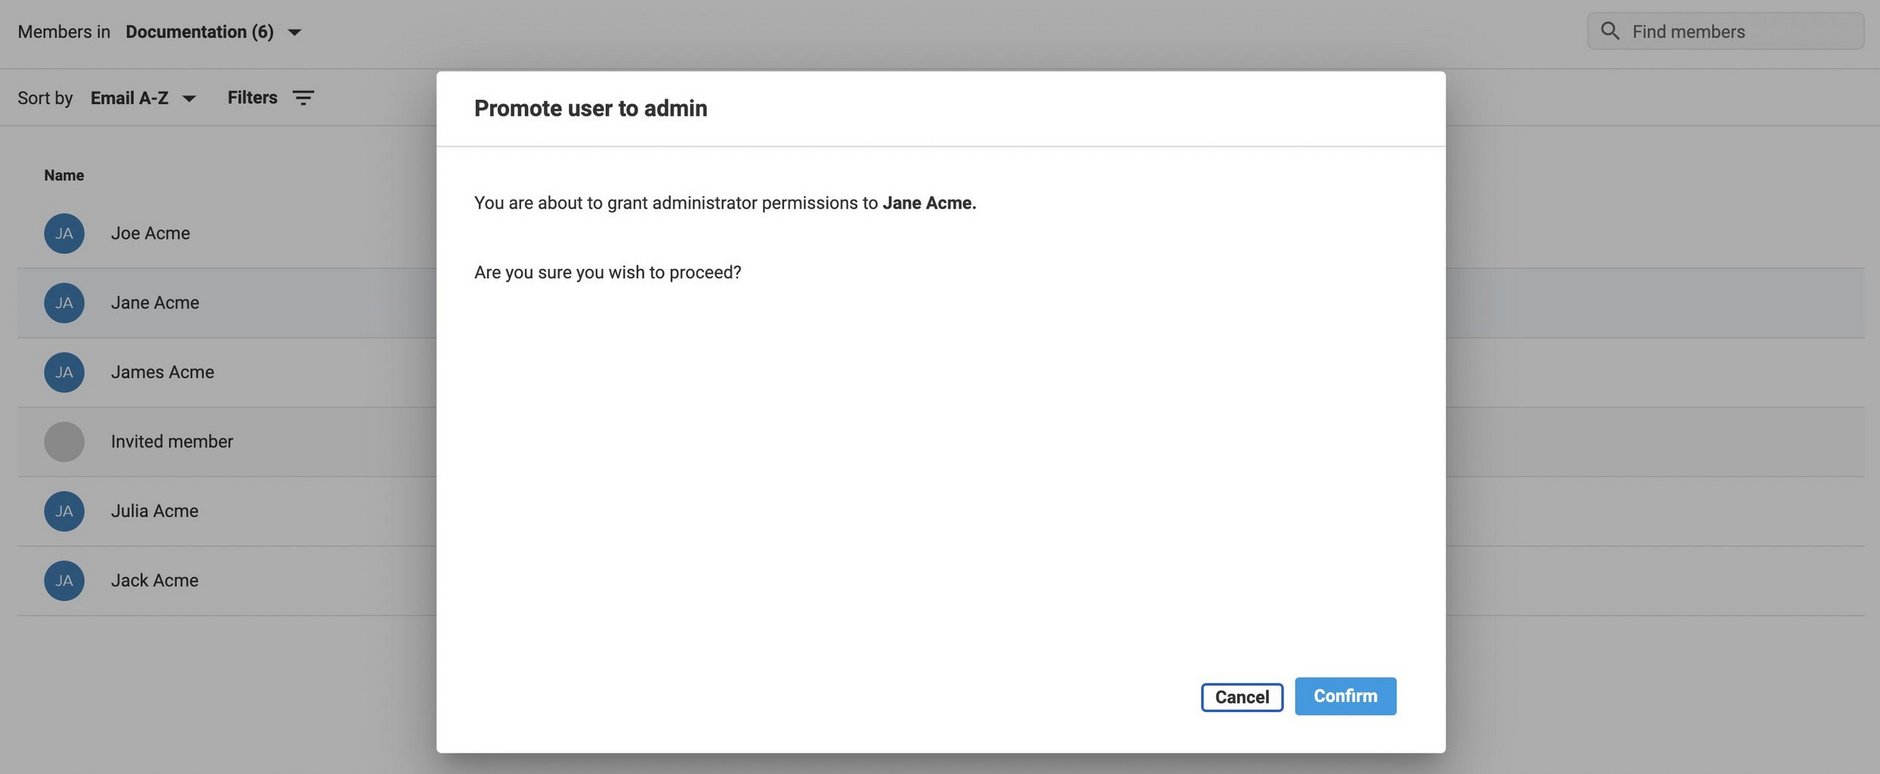 Promote to admin confirmation dialog